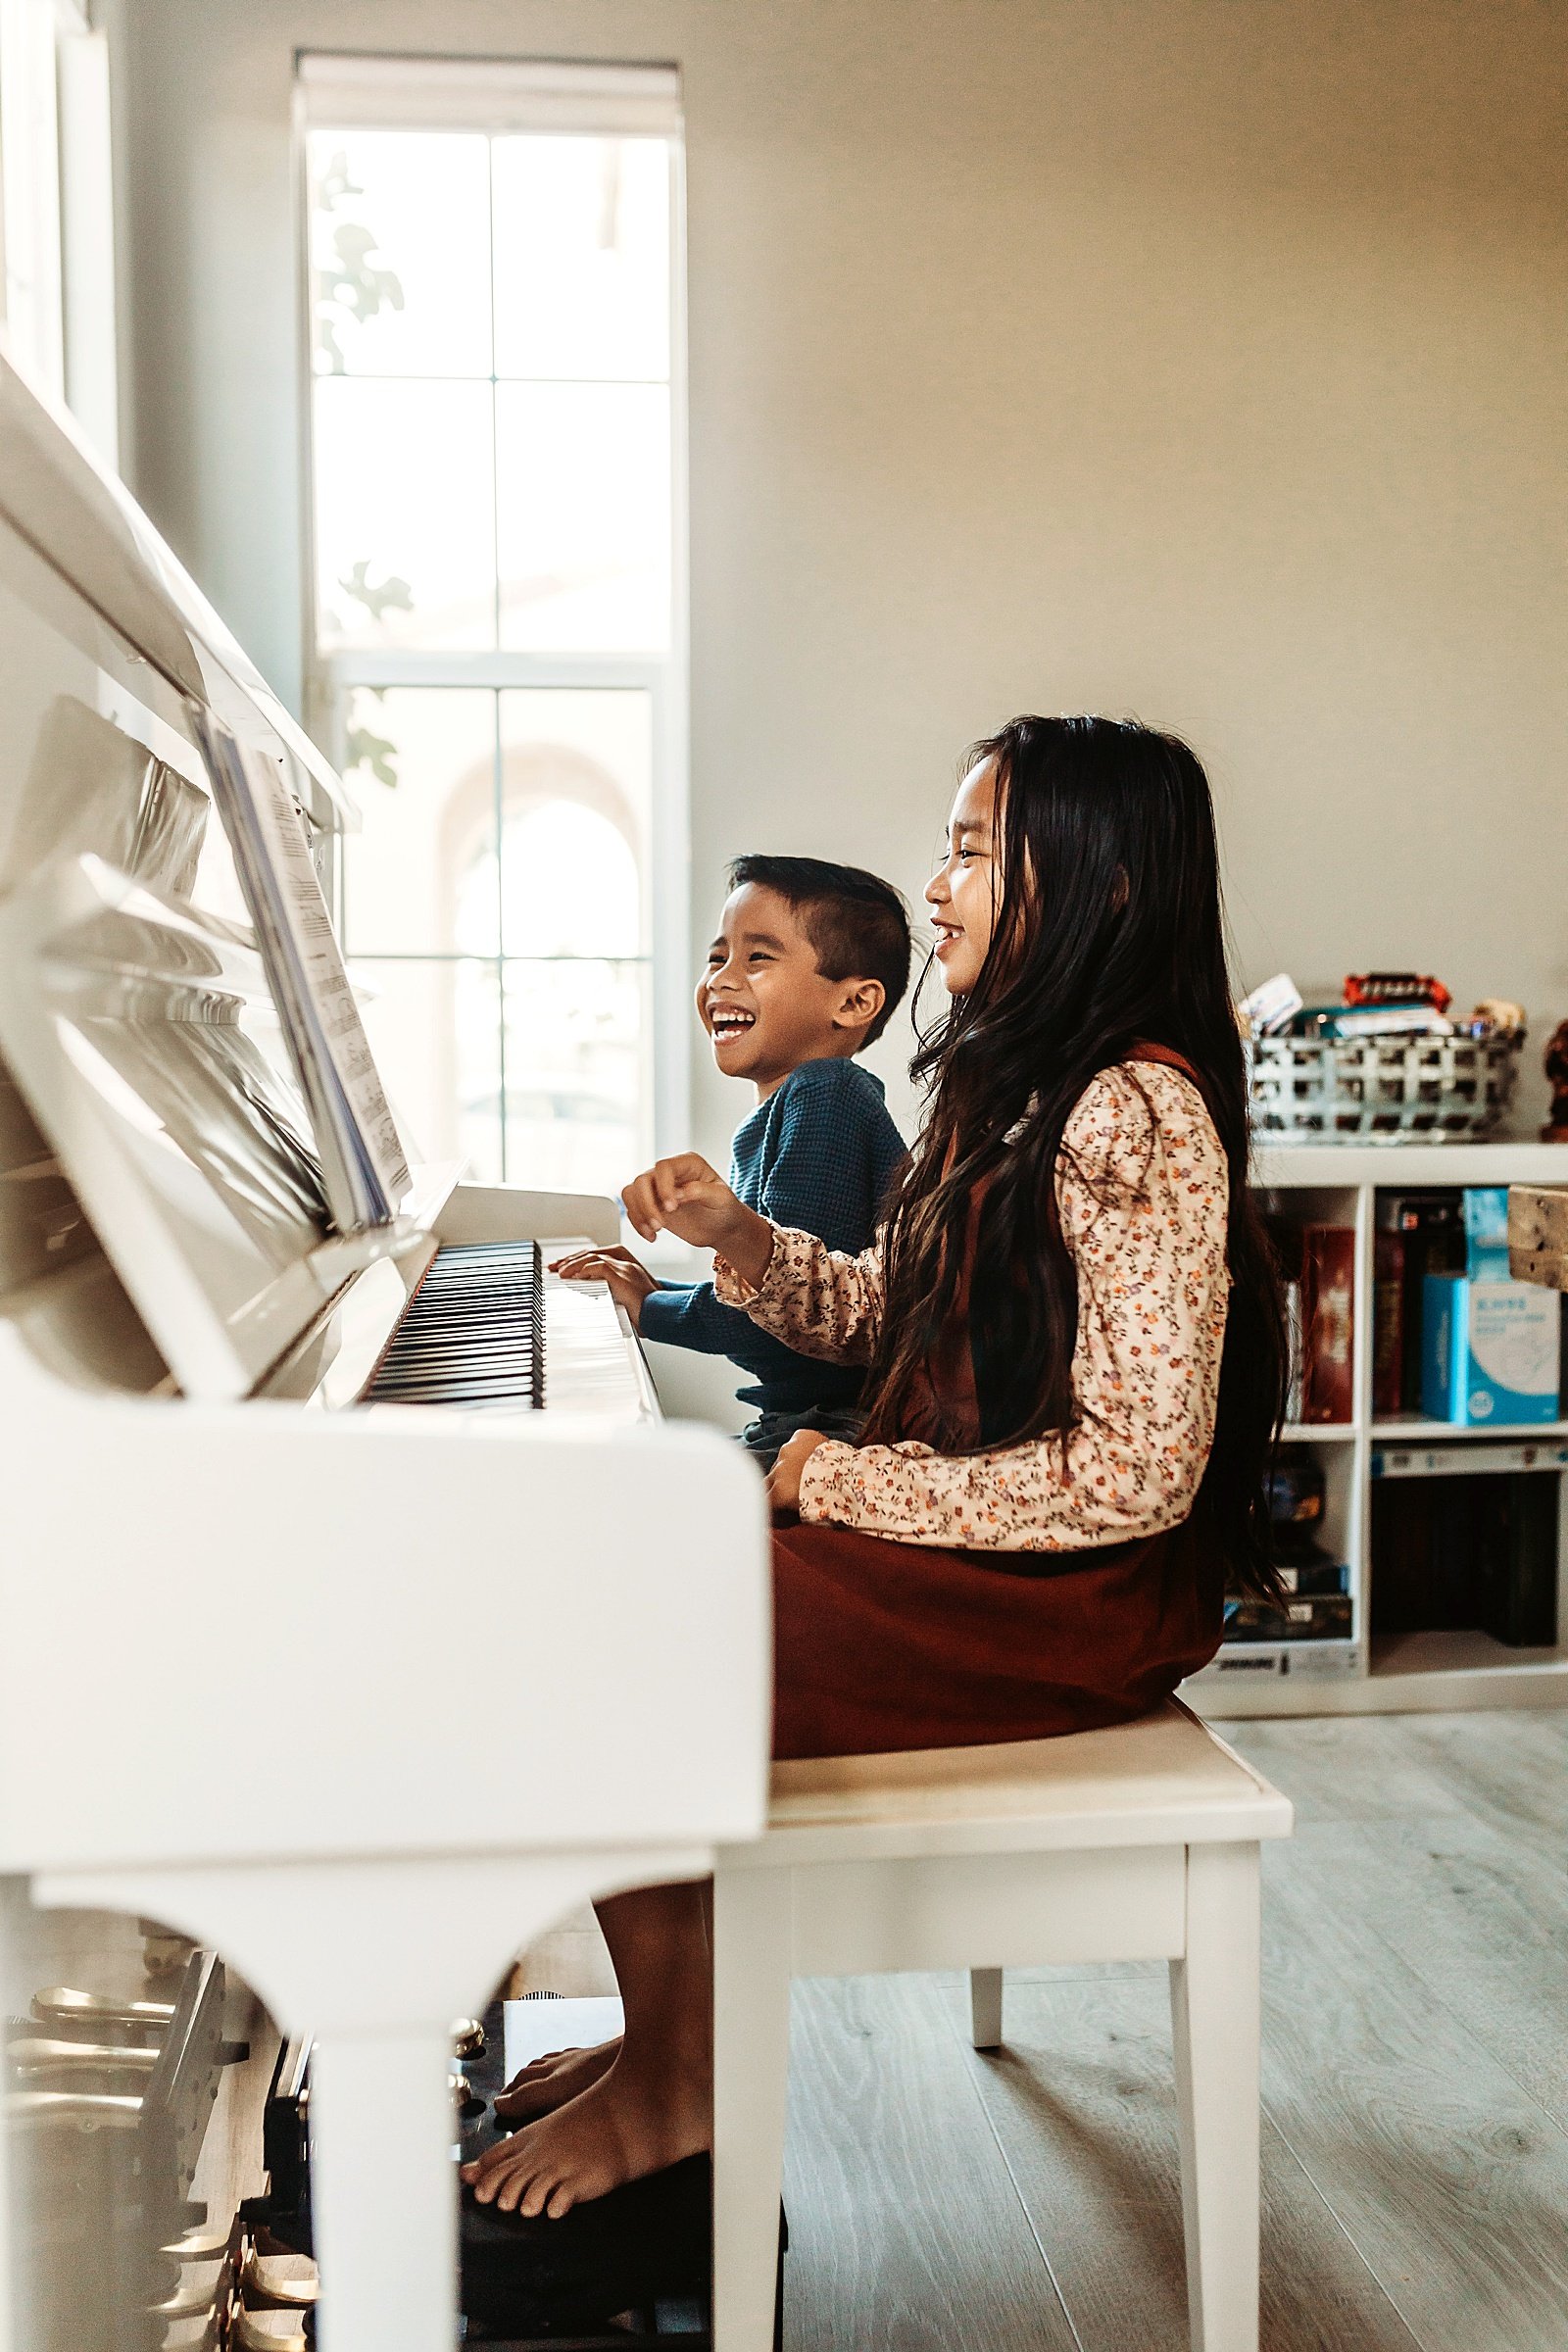  Kids playing the piano at their lifestyle photo session in California  